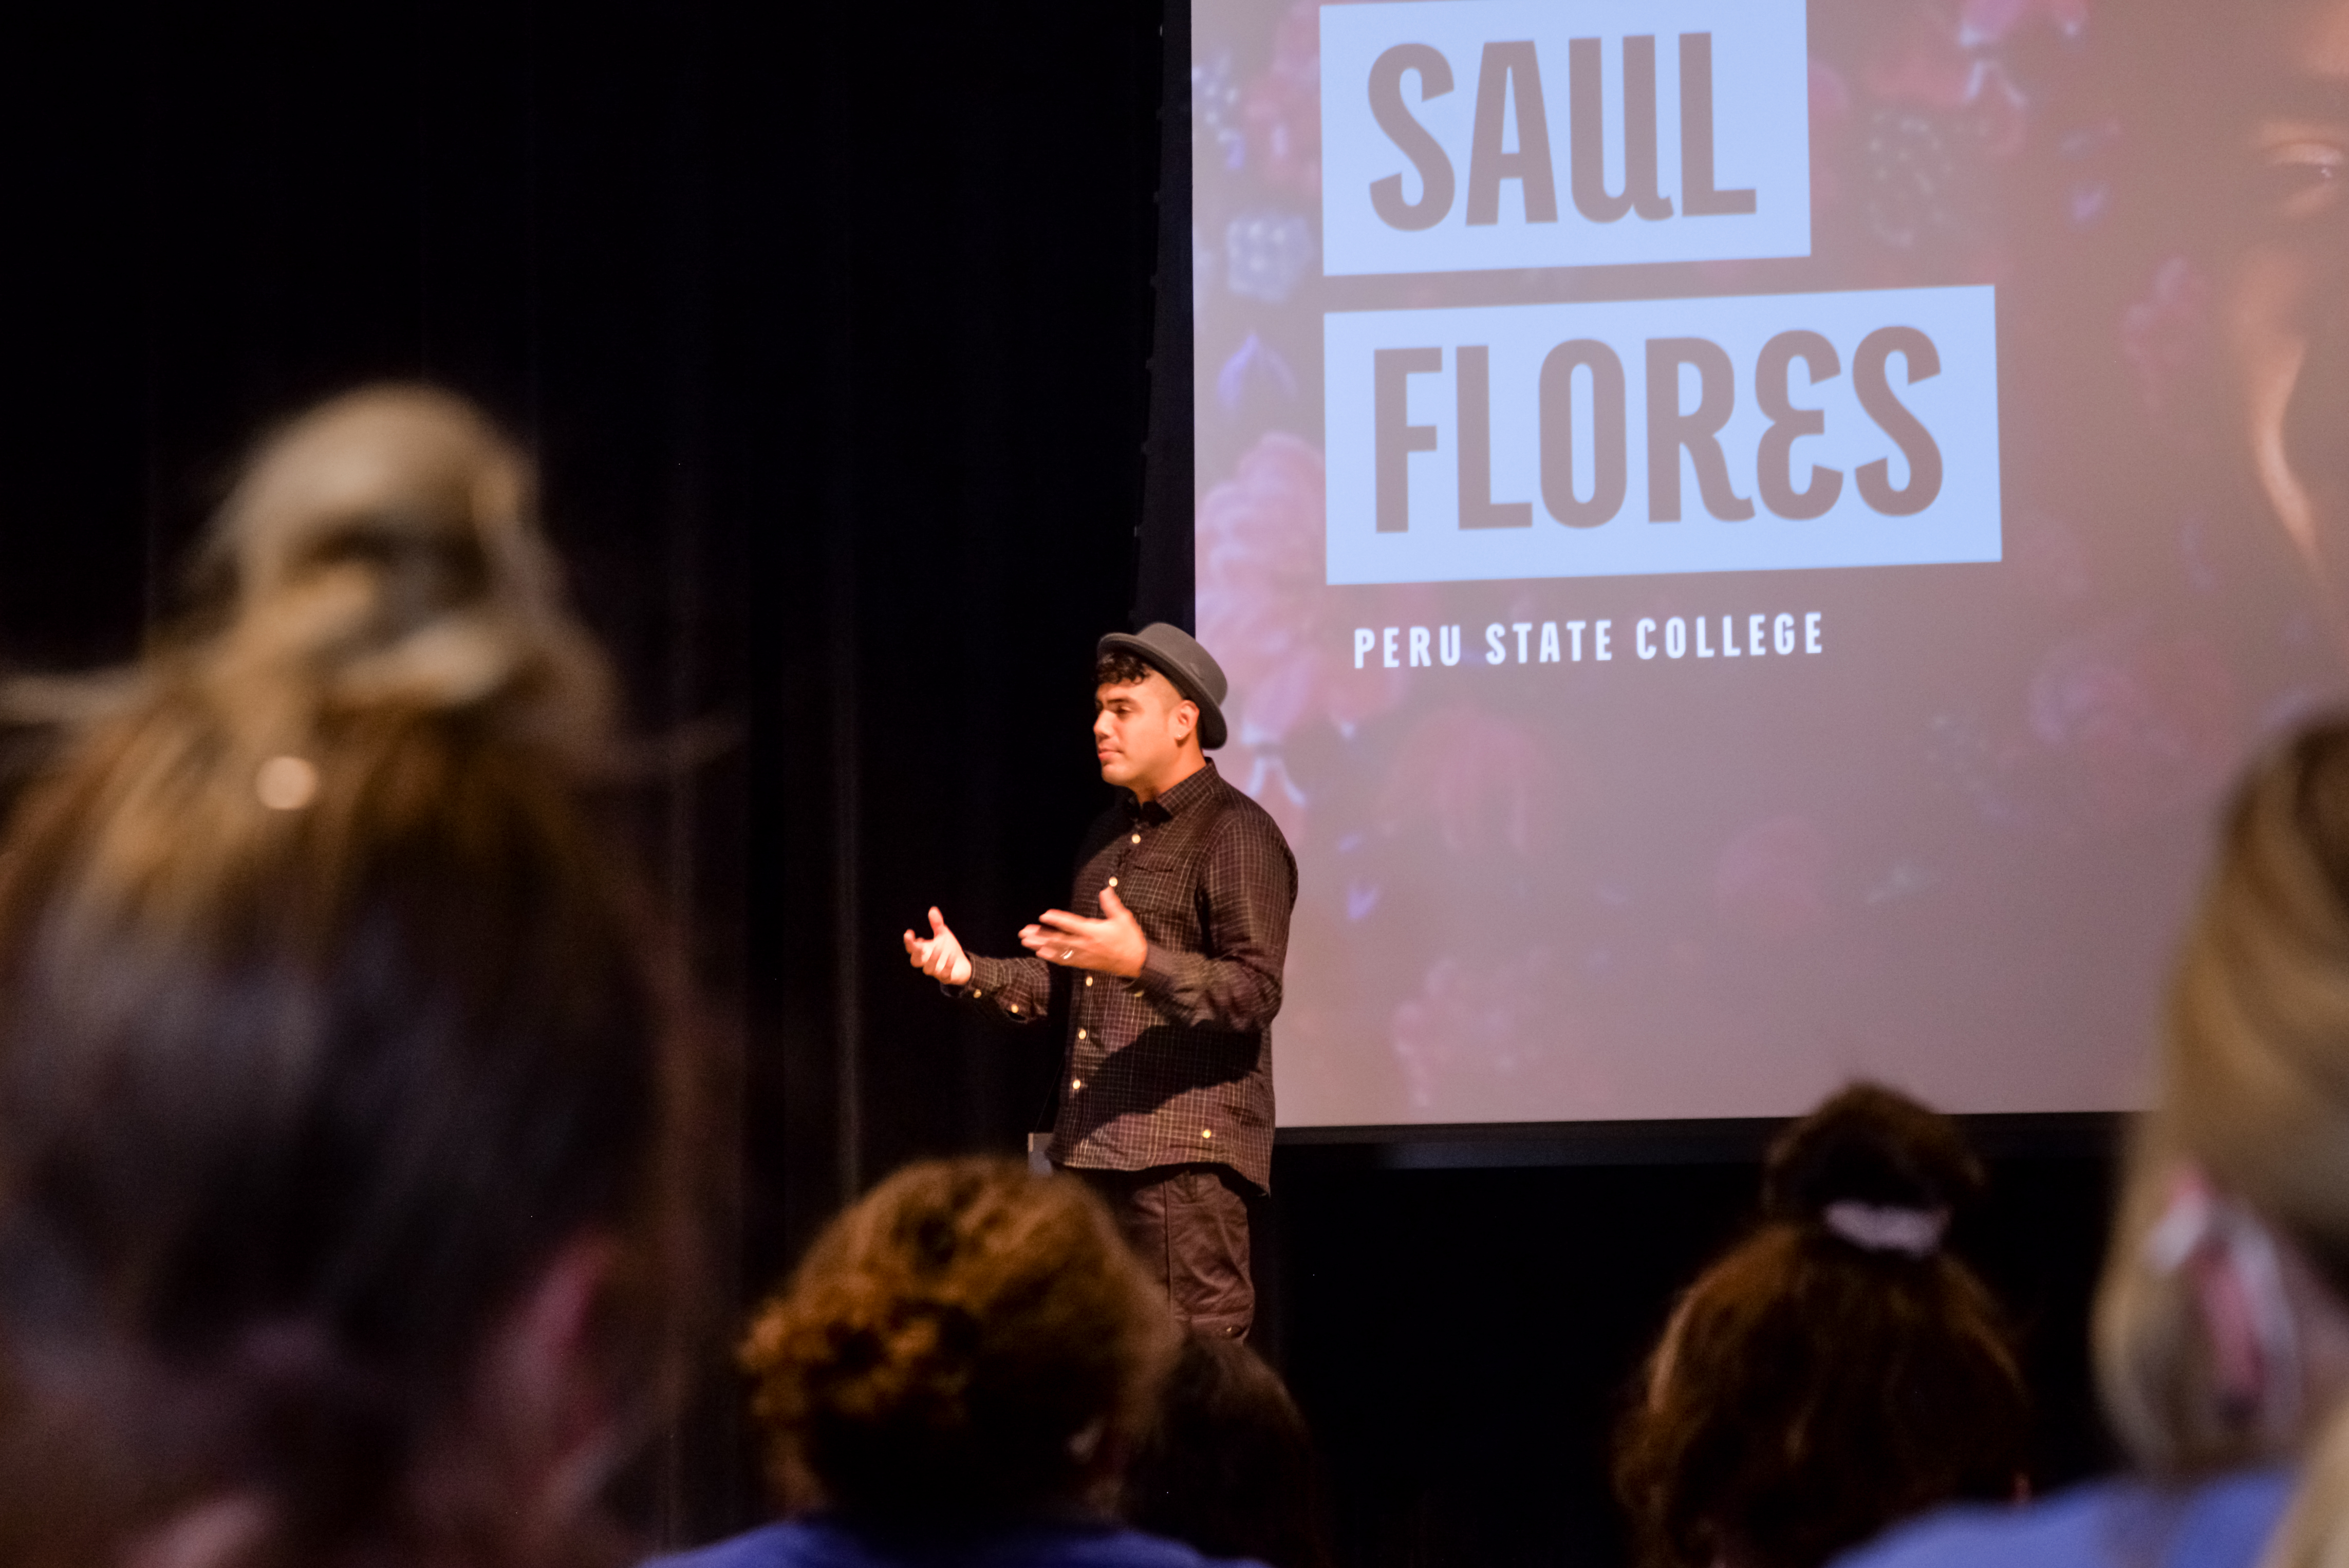 Saul Flores presents in the Performing Arts Center